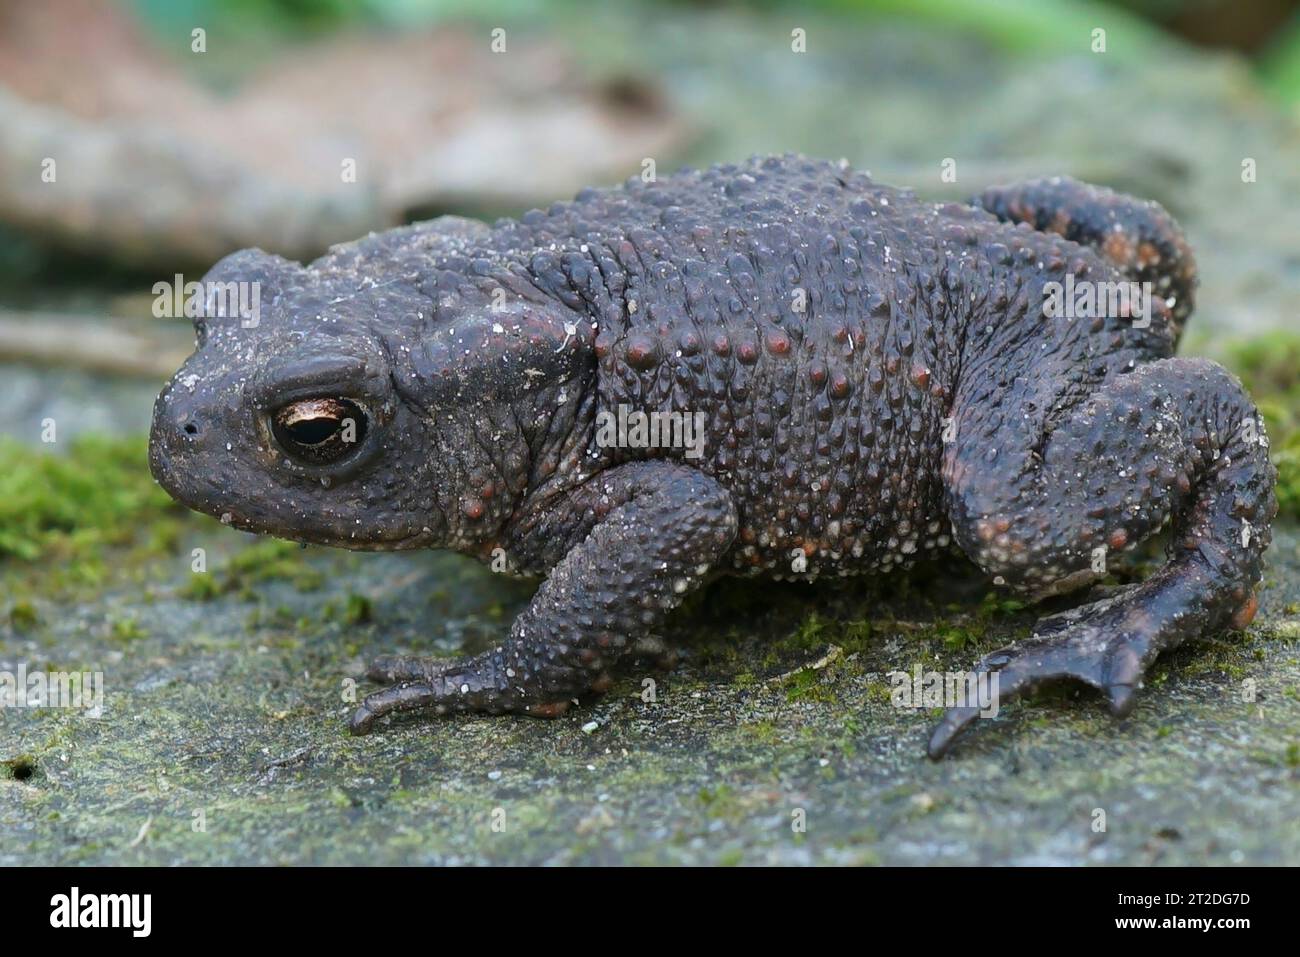 Closeup on a Common Europea toad, Bufo bufo sitting in the garden Stock Photo